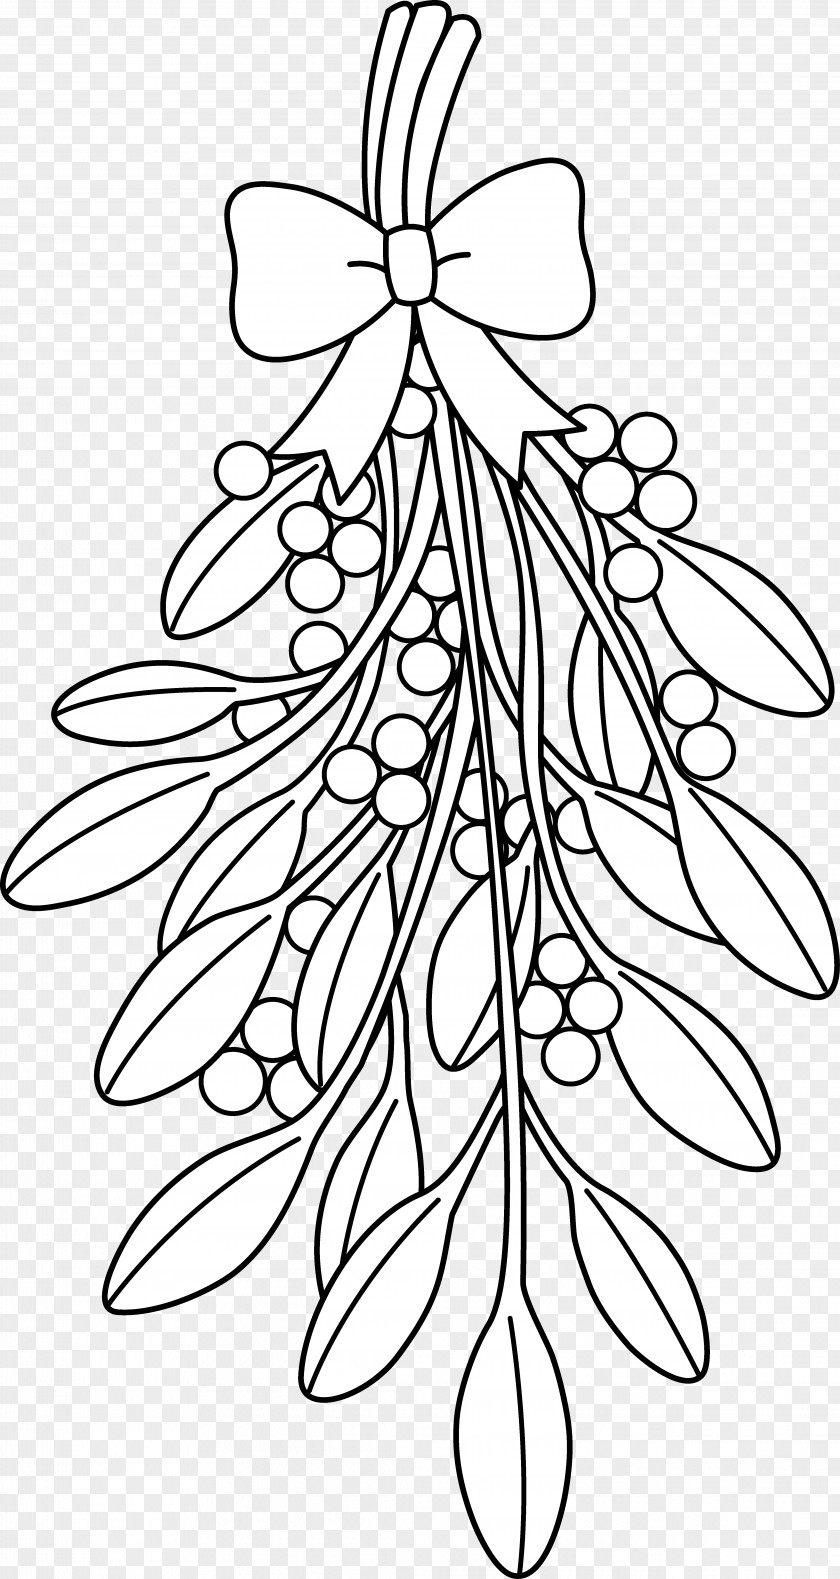 Tree Mistletoe Coloring Book Drawing Christmas PNG